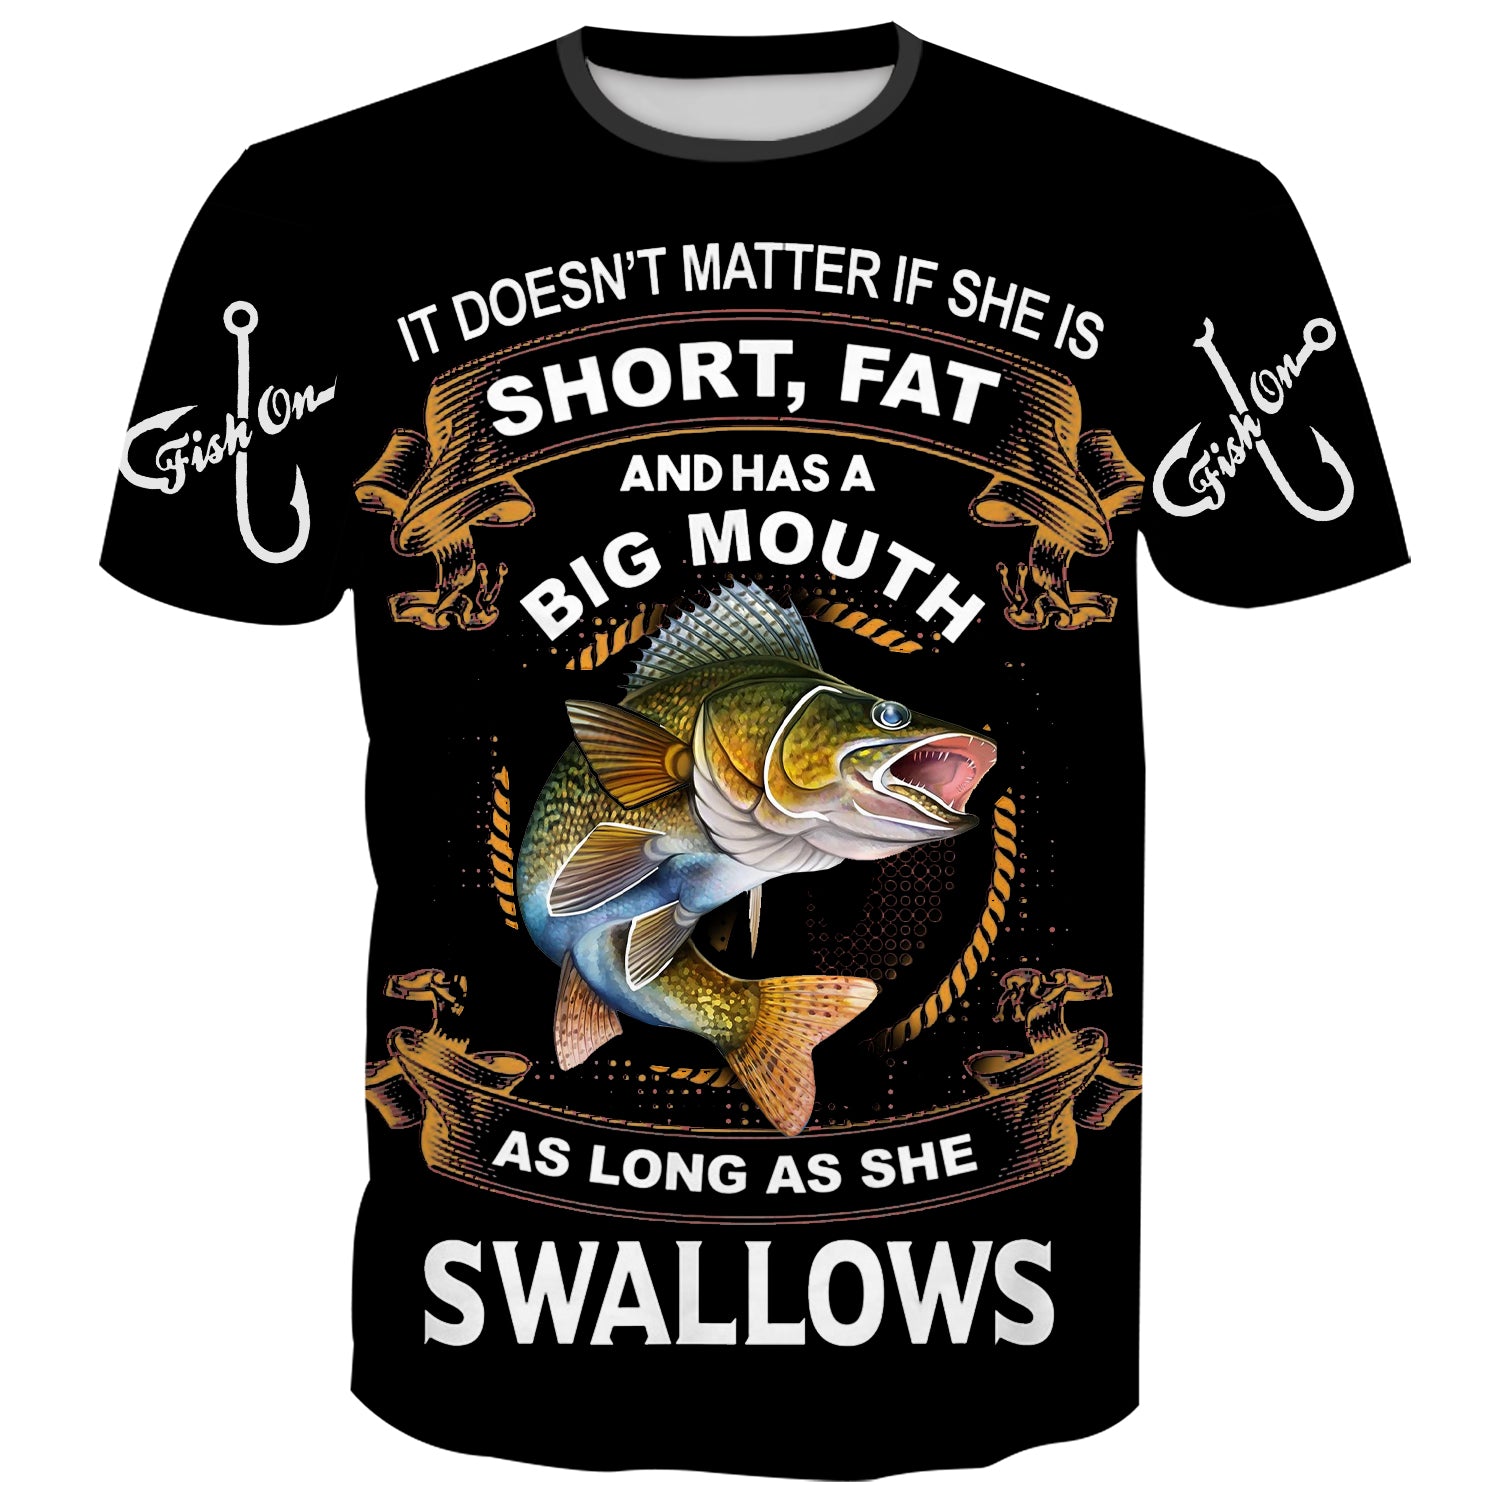 It doesn't matter if she is short, fat and has a big mouth as long as she swallows - T-Shirt